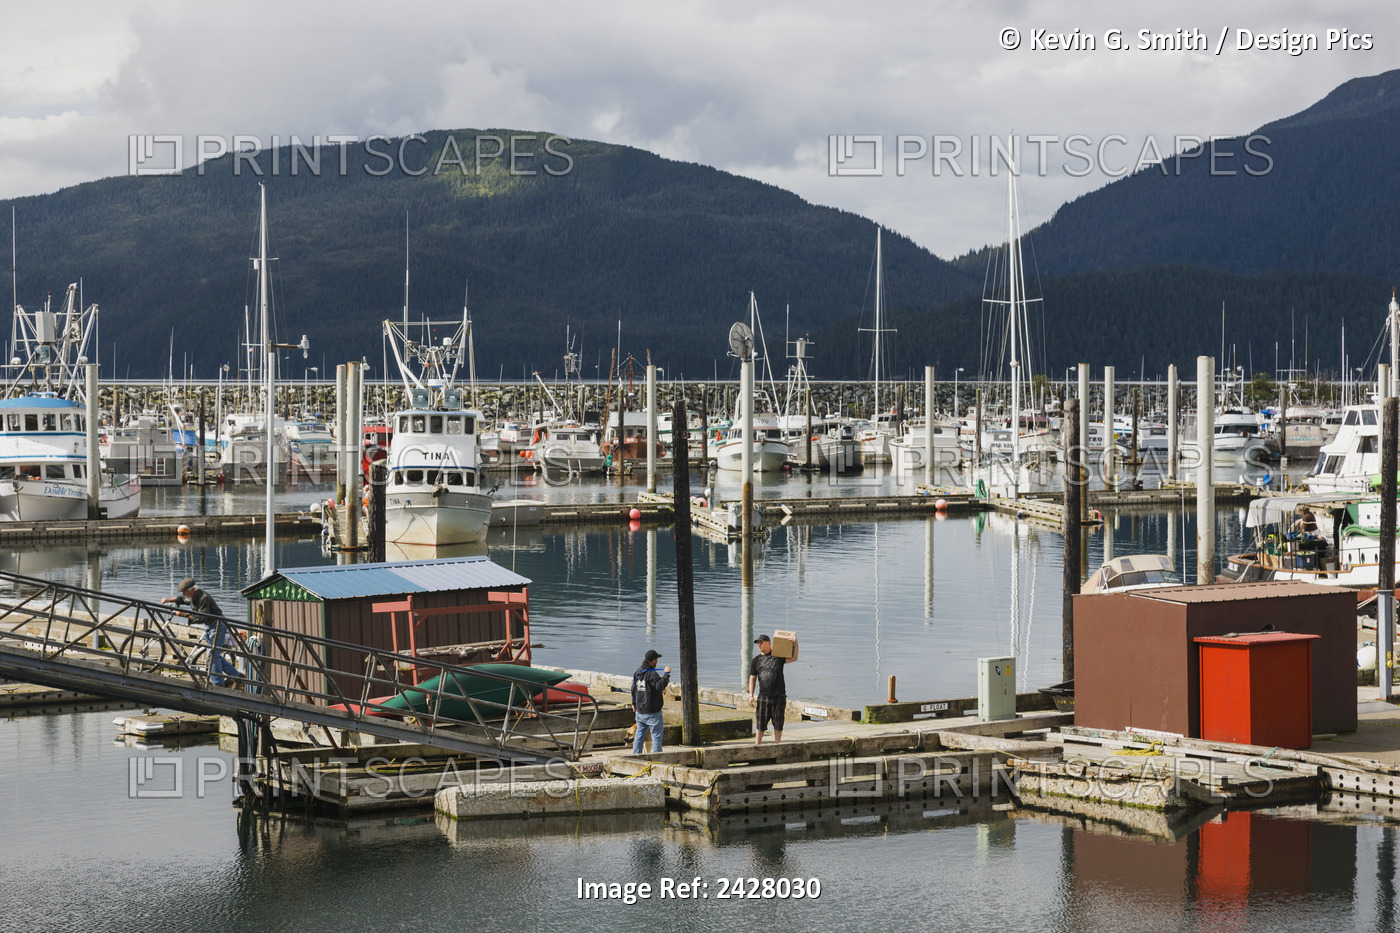 Workers On The Docks At The Cordova Small Boat Harbor, Prince William Sound, ...